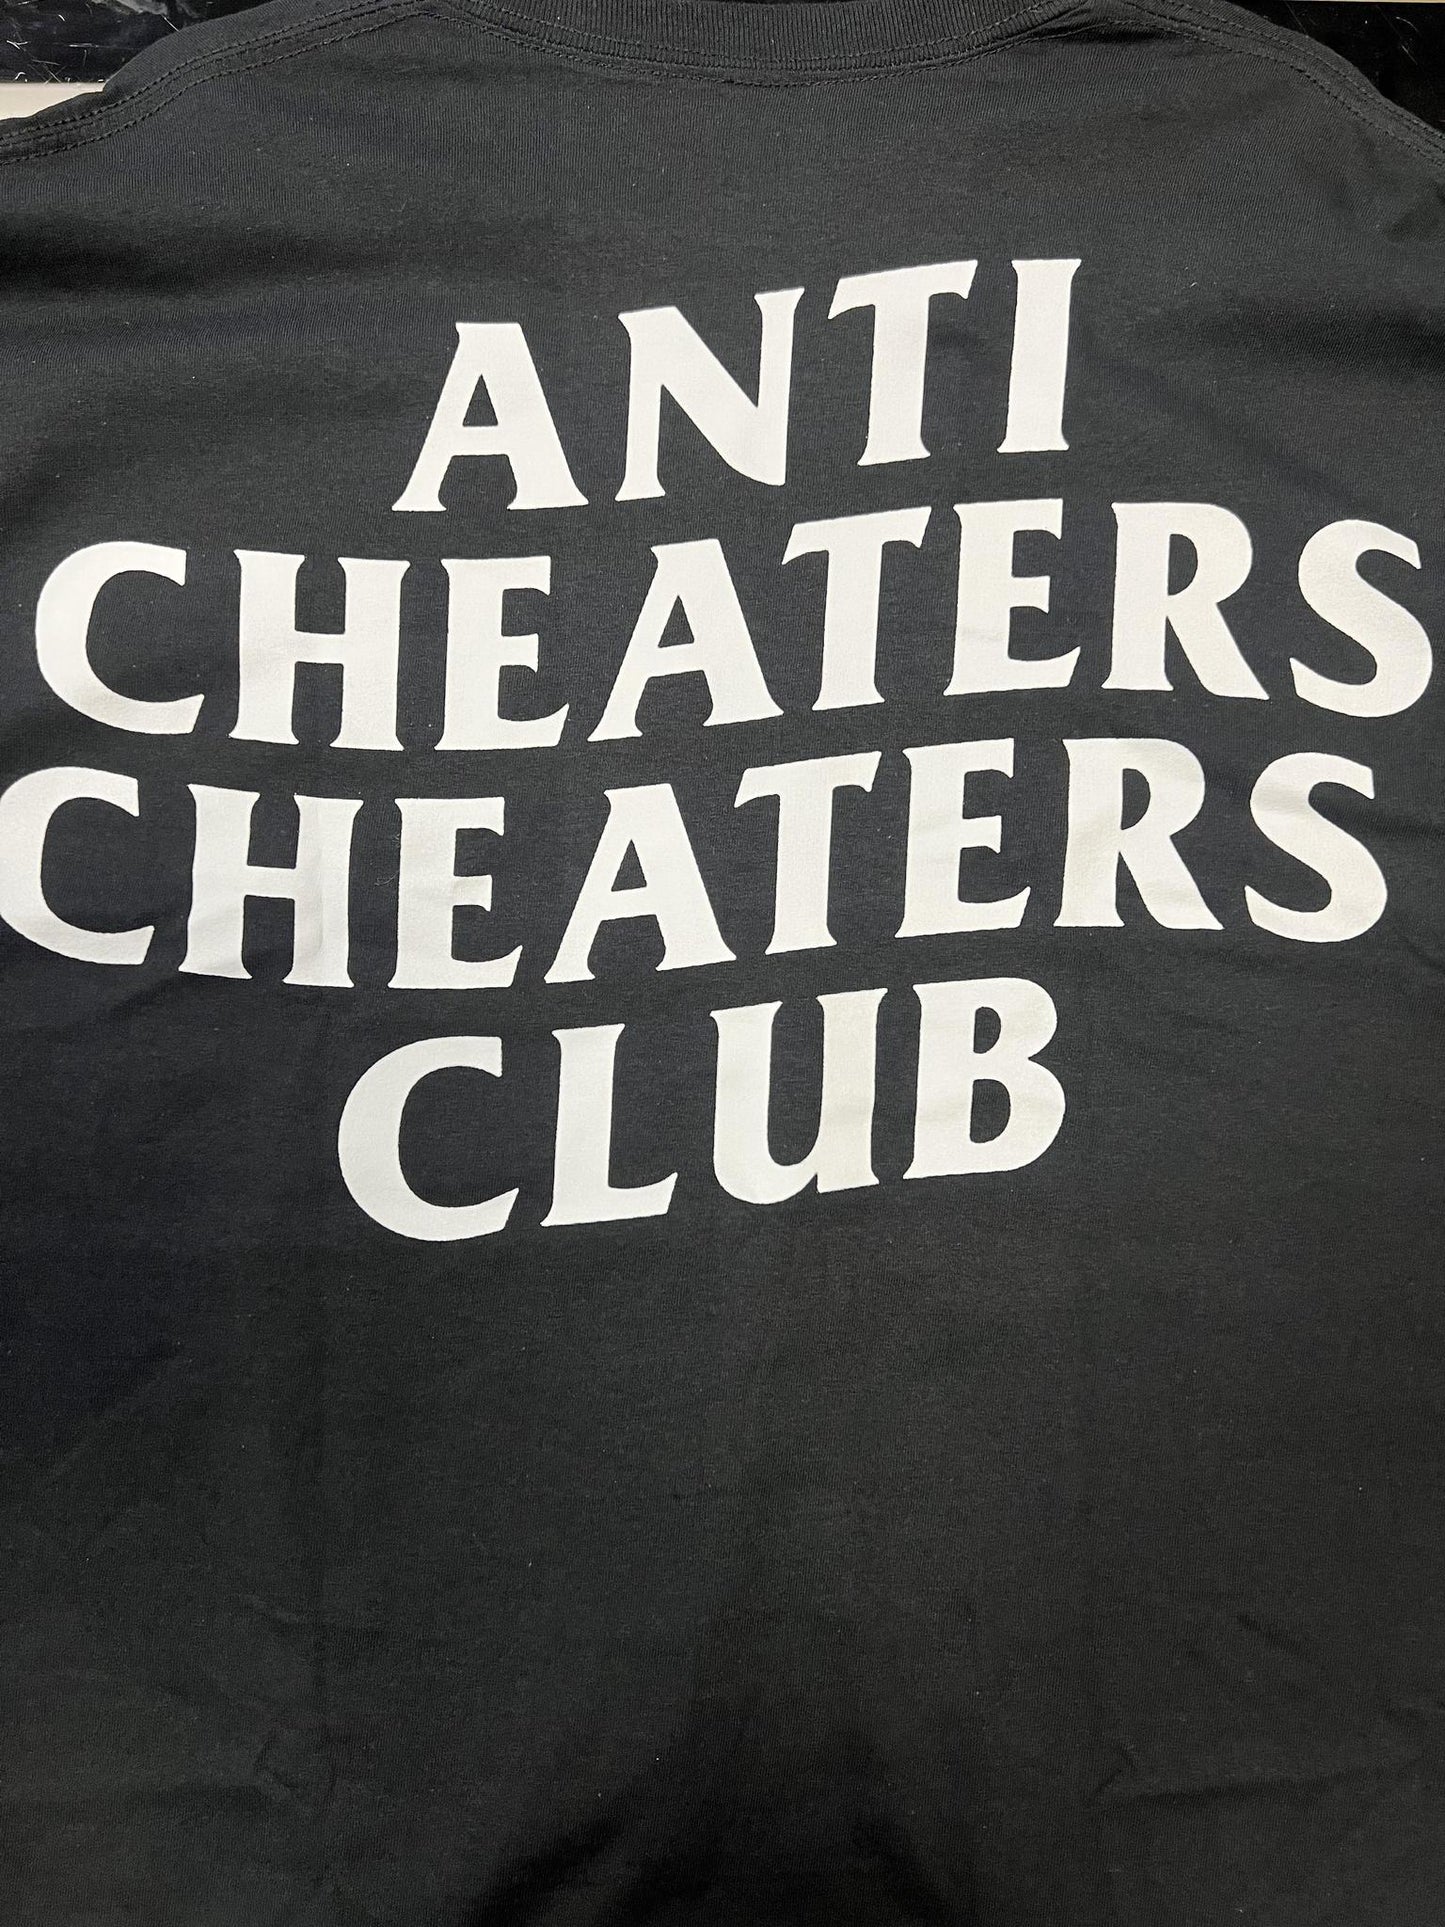 Full Auto Airsoft Exclusive - Anti Cheaters Cheaters Club